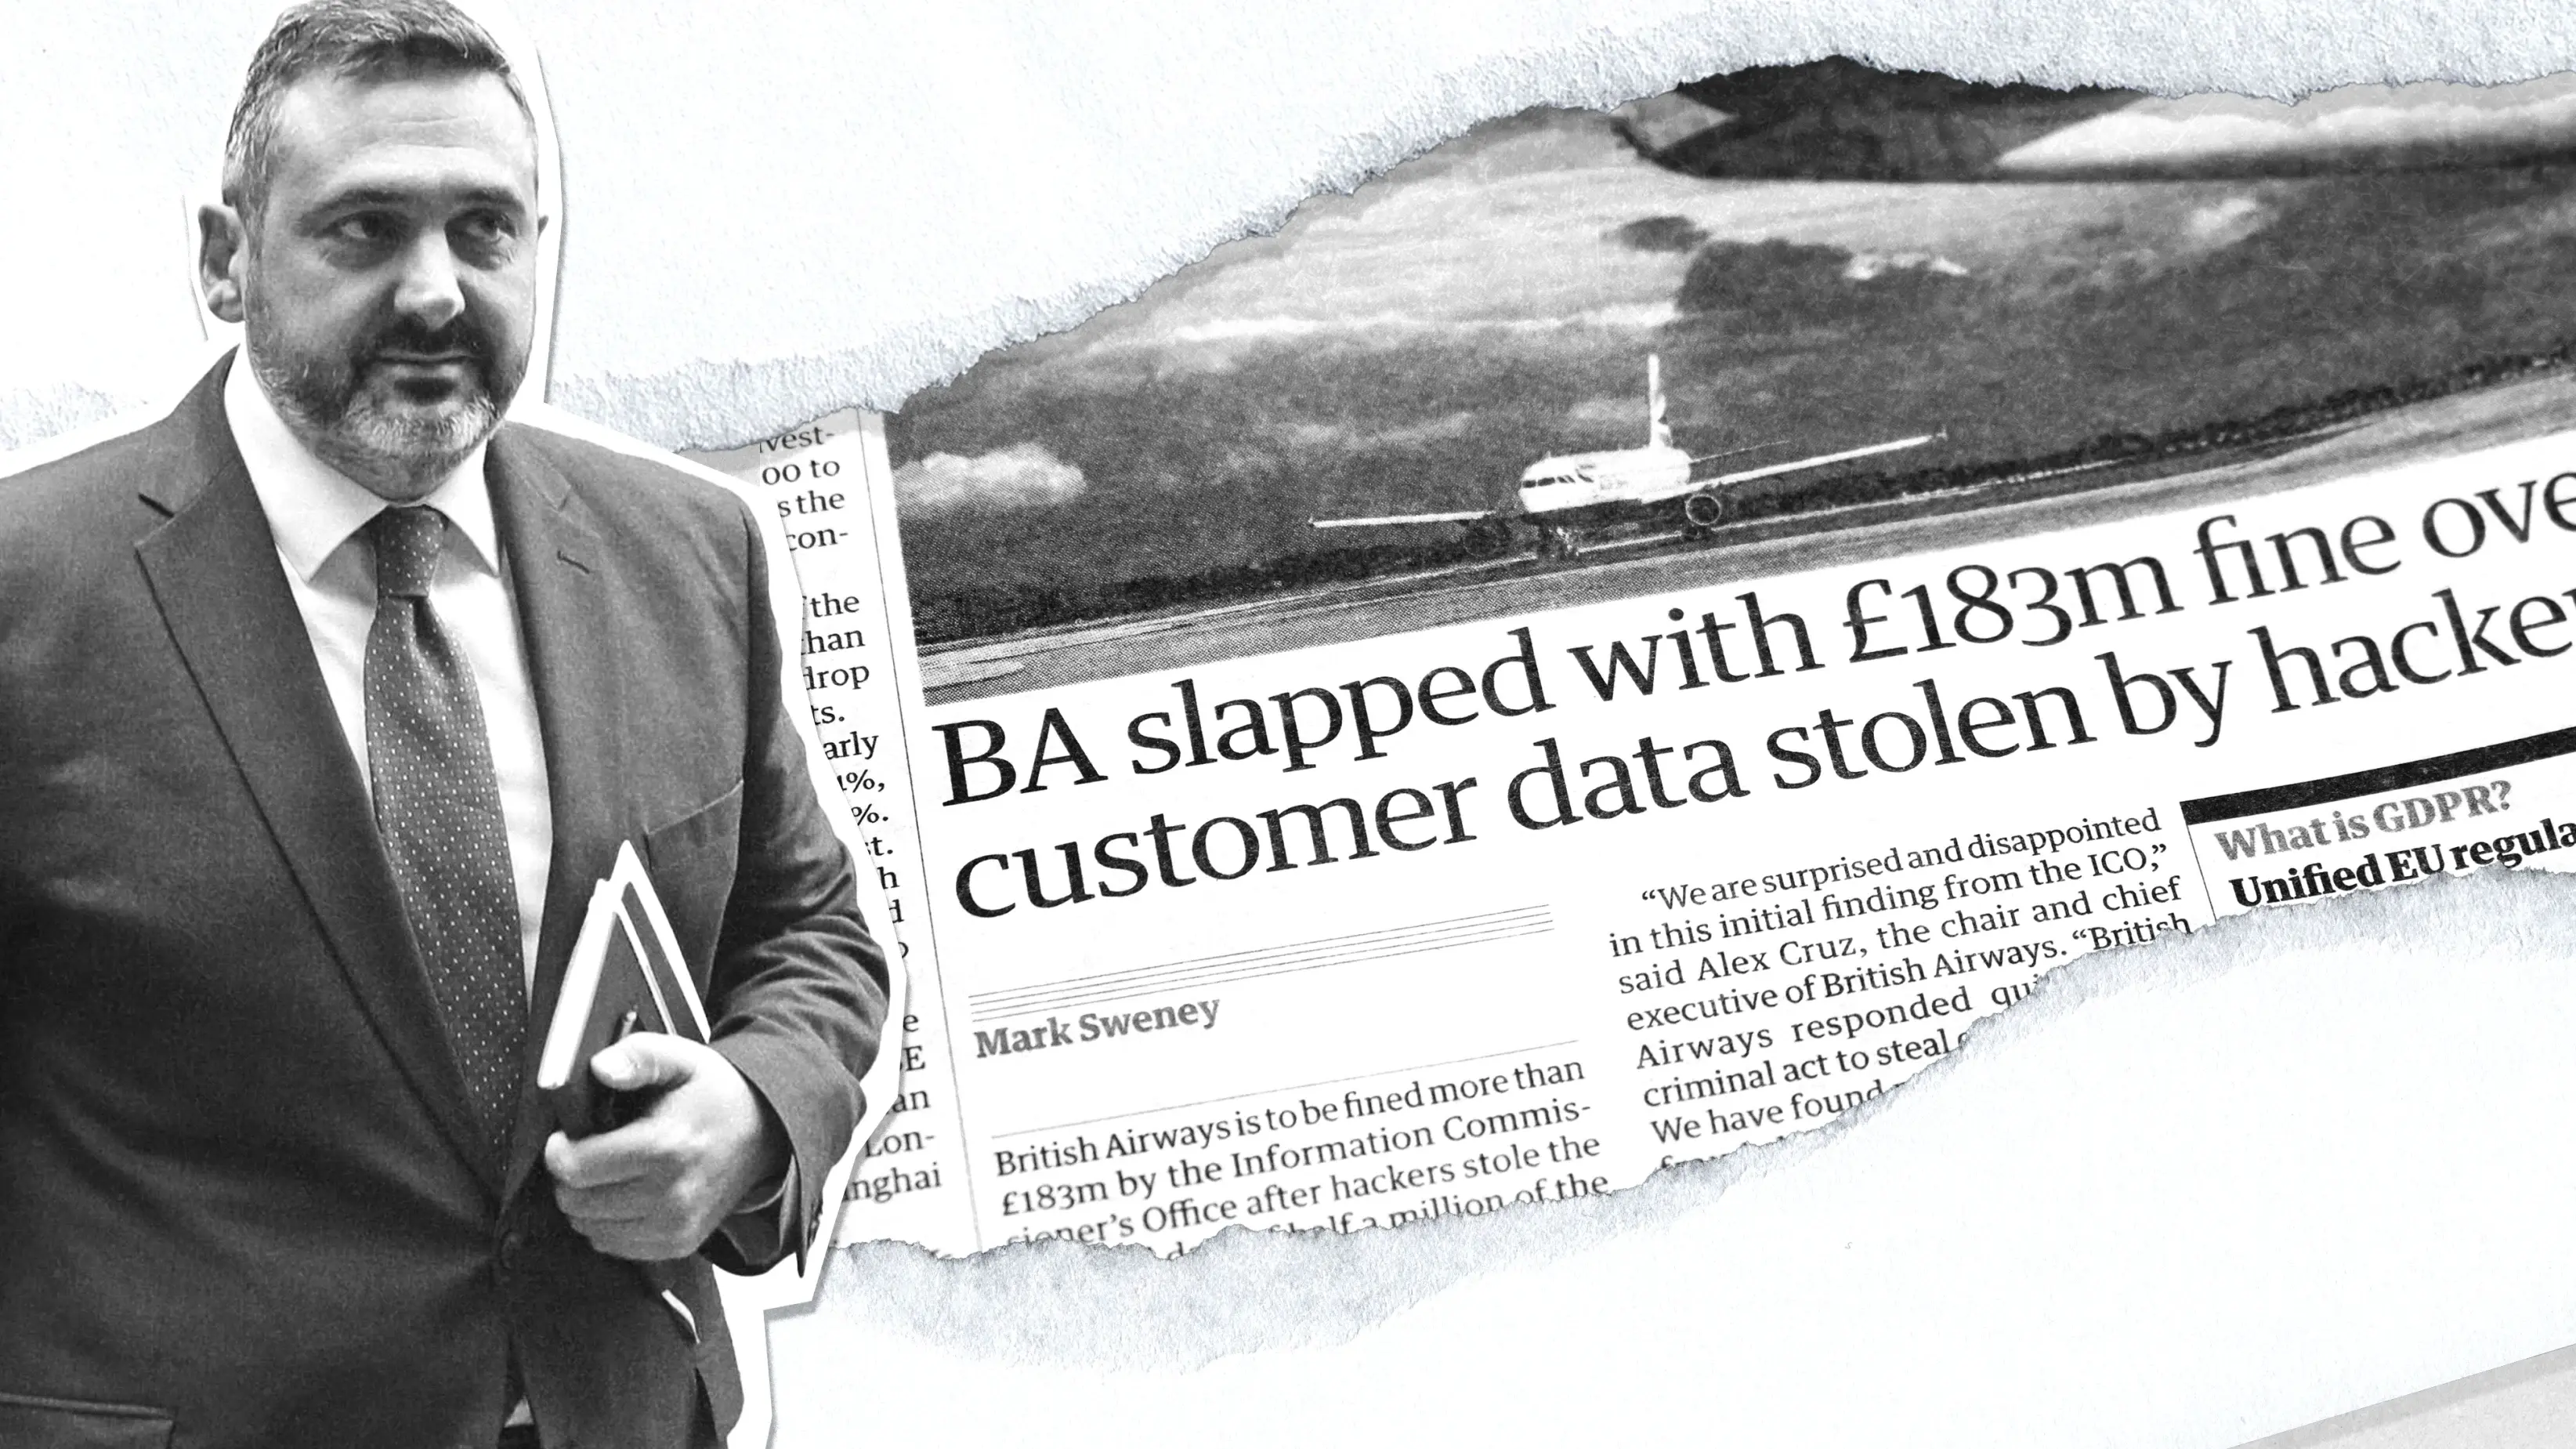 A paper cutout of the British Airways Chief on top of a paper cutout of a news headline that reads 'BA slapped with £183m fine over customer data stolen by hacker'